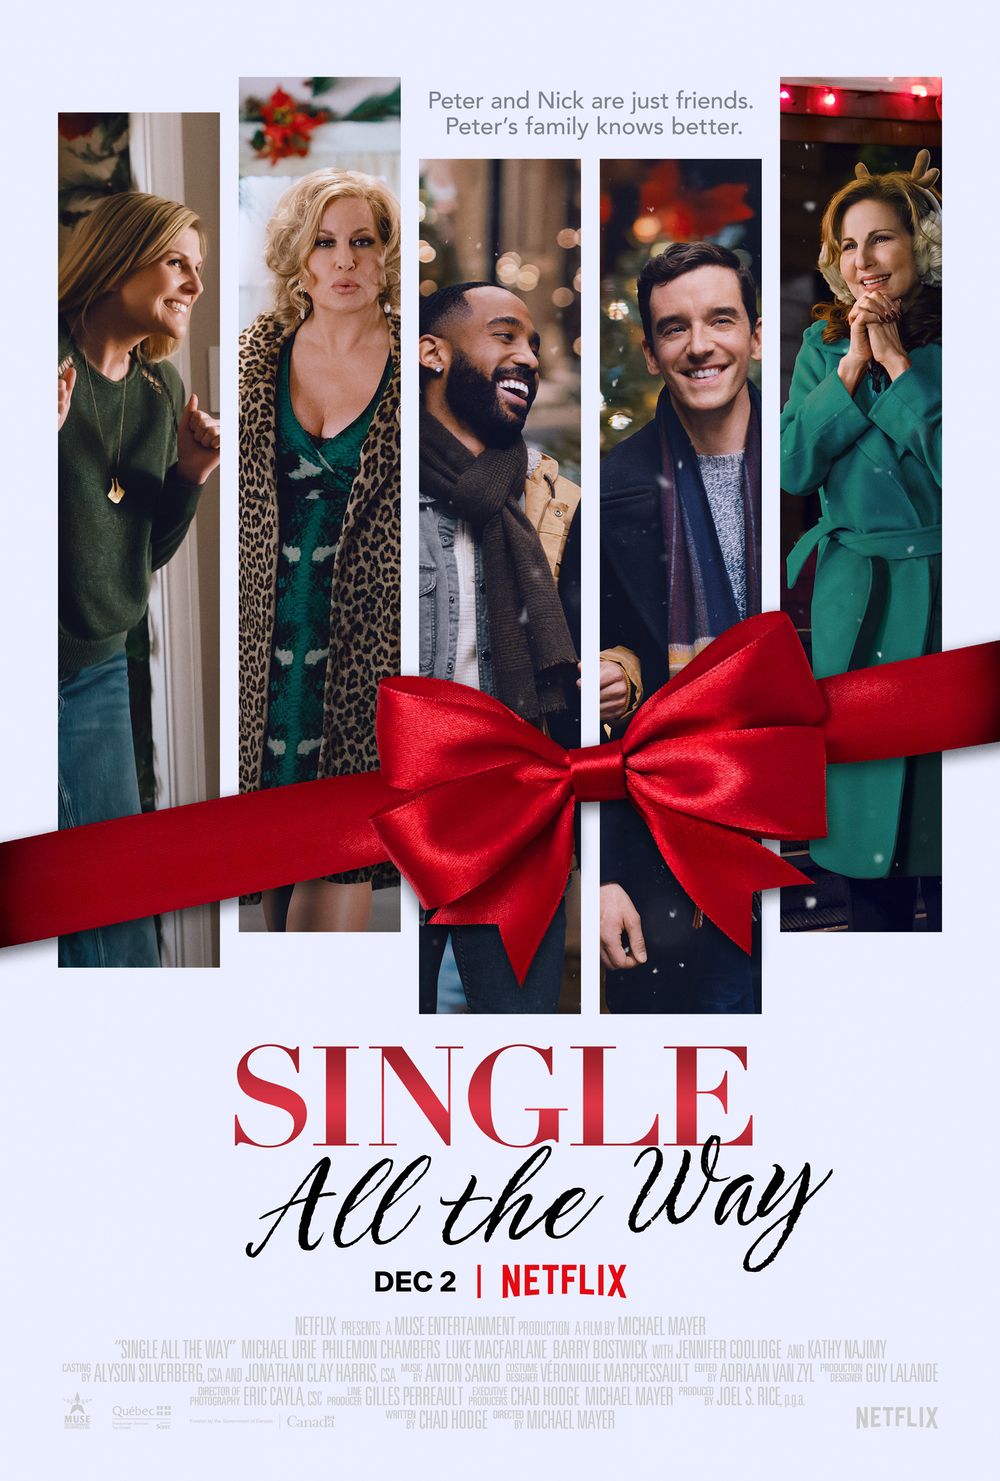 Tamara Miller's music featured in SINGLE ALL THE WAY! (Netflix)